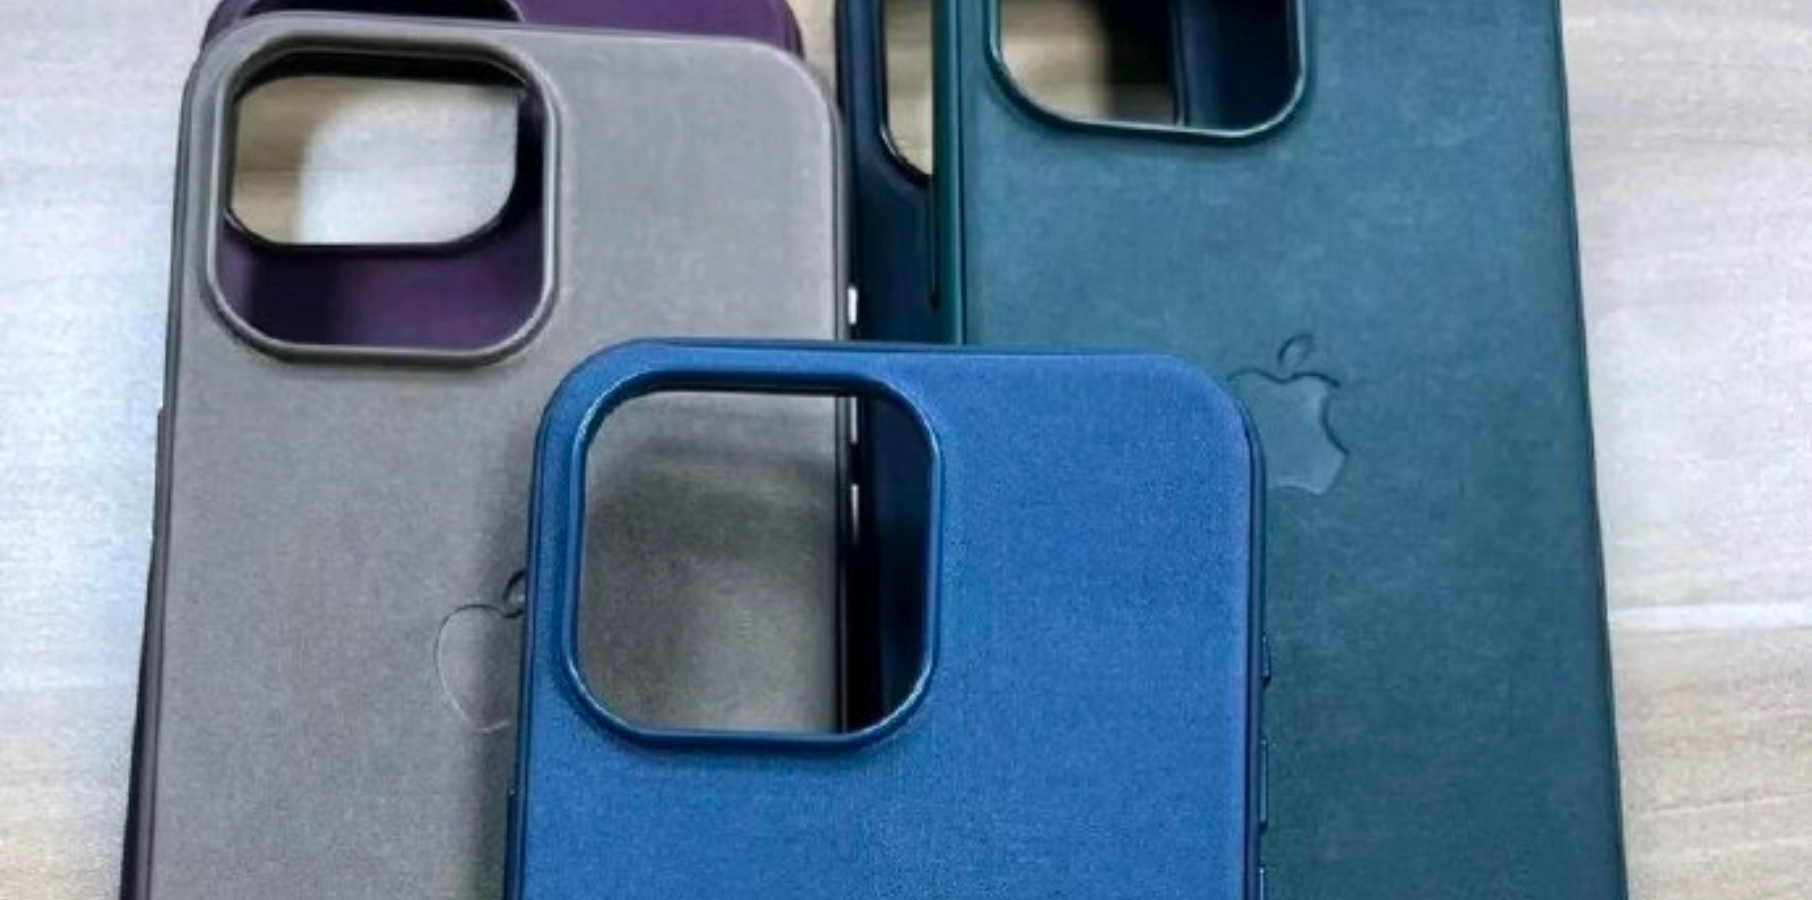 Apple reportedly won't make leather cases for the iPhone 15 - The